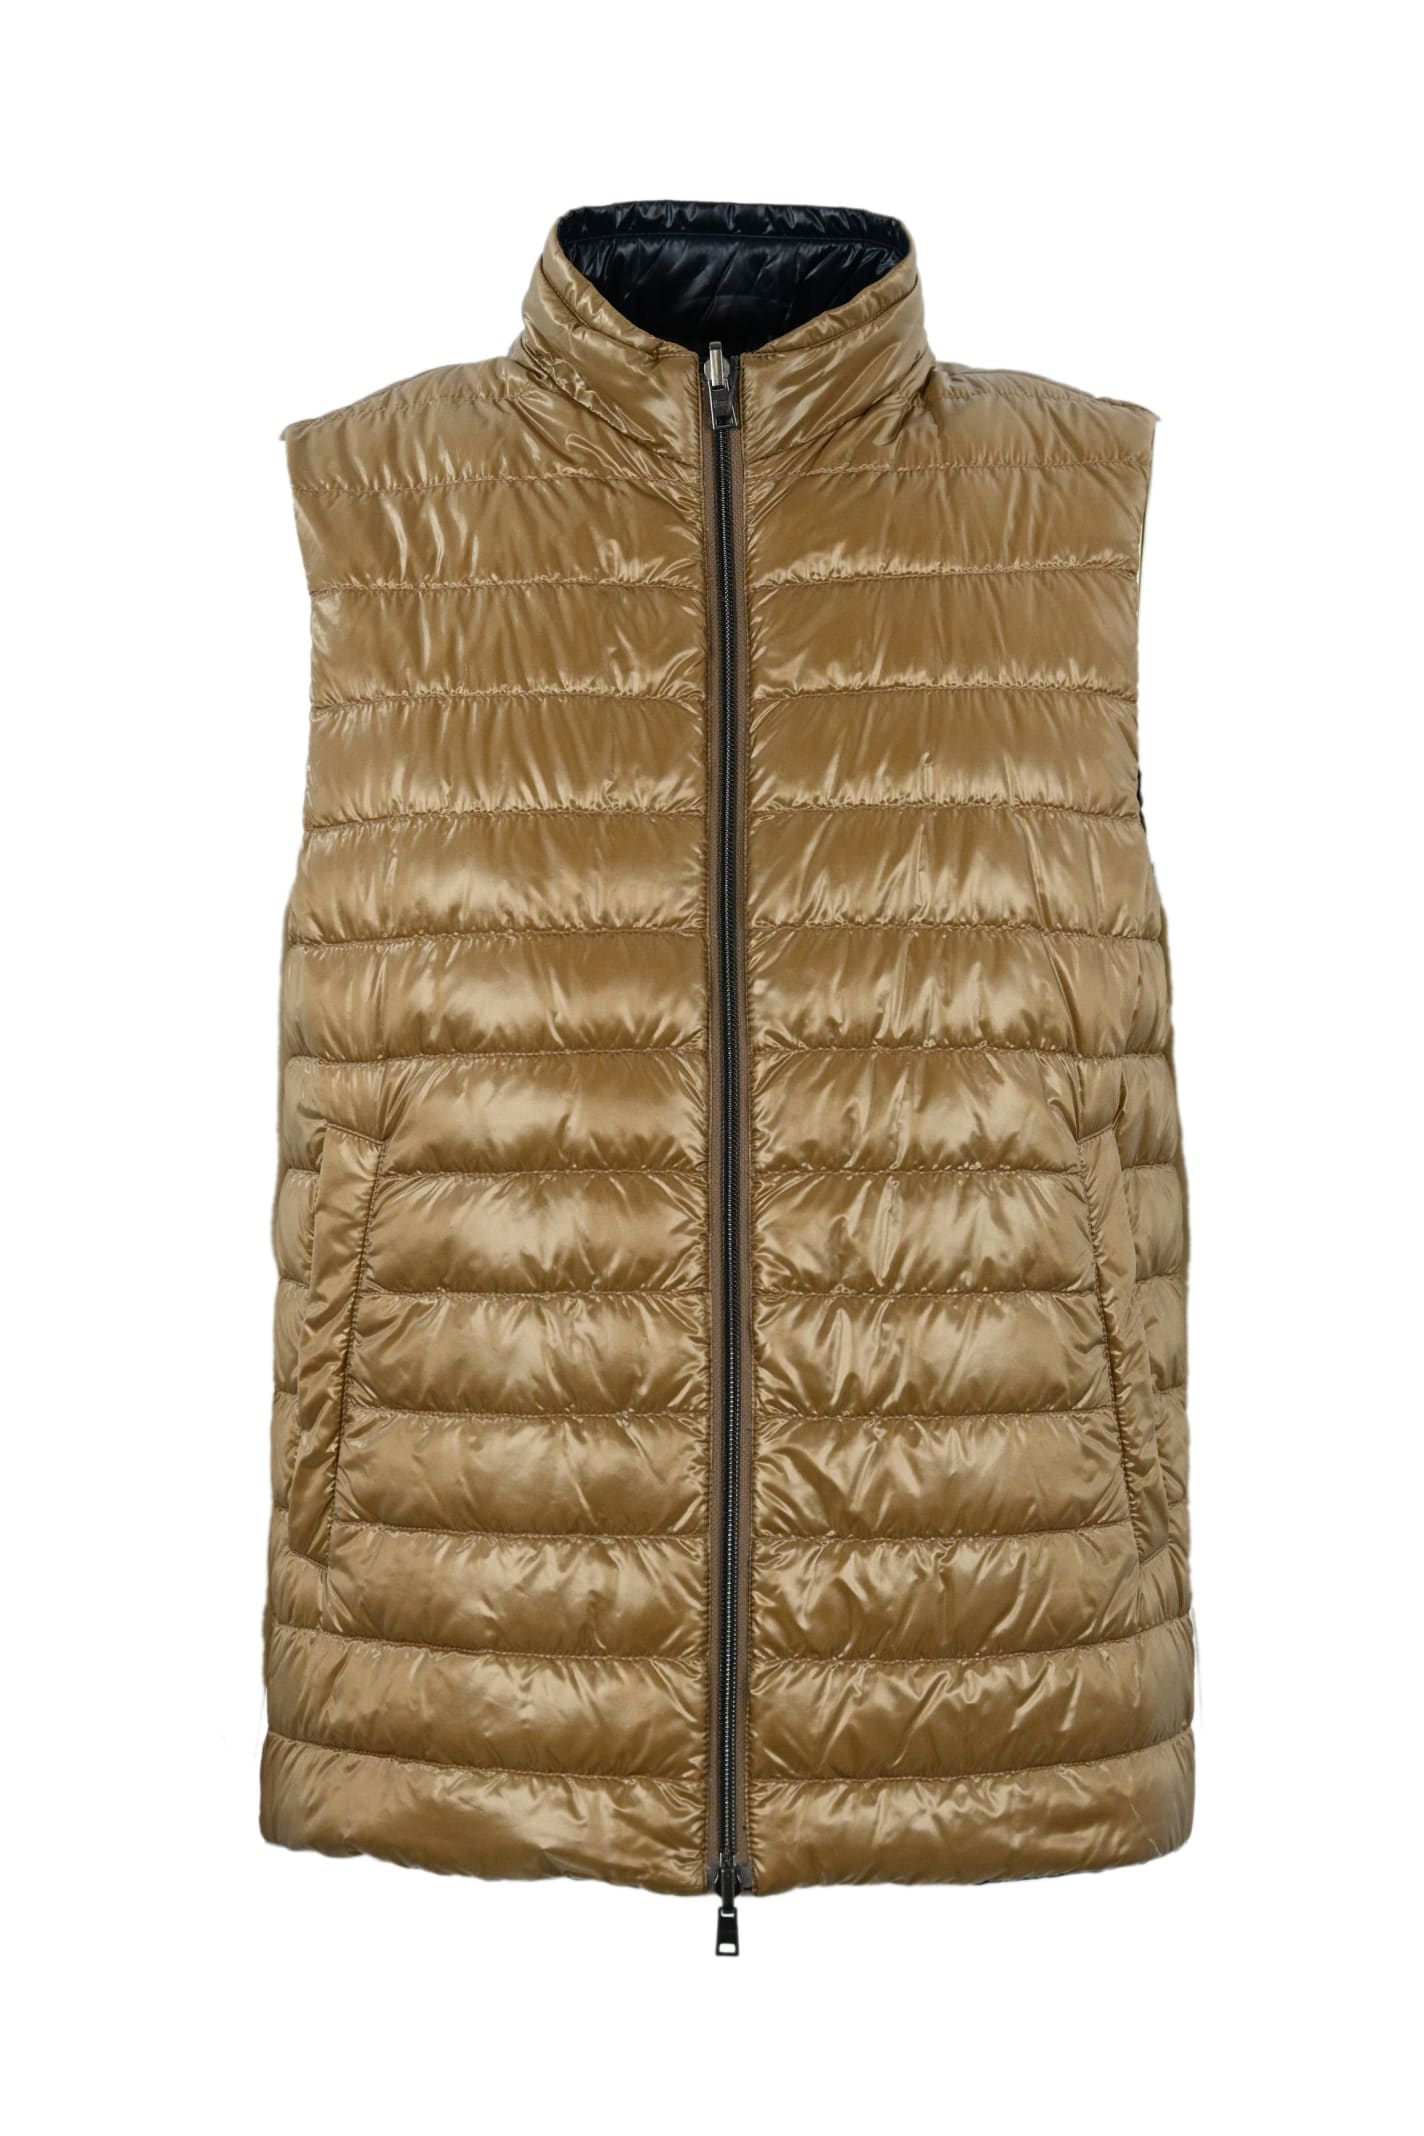 Herno Reversible Quilted Vest In Cammello/blu